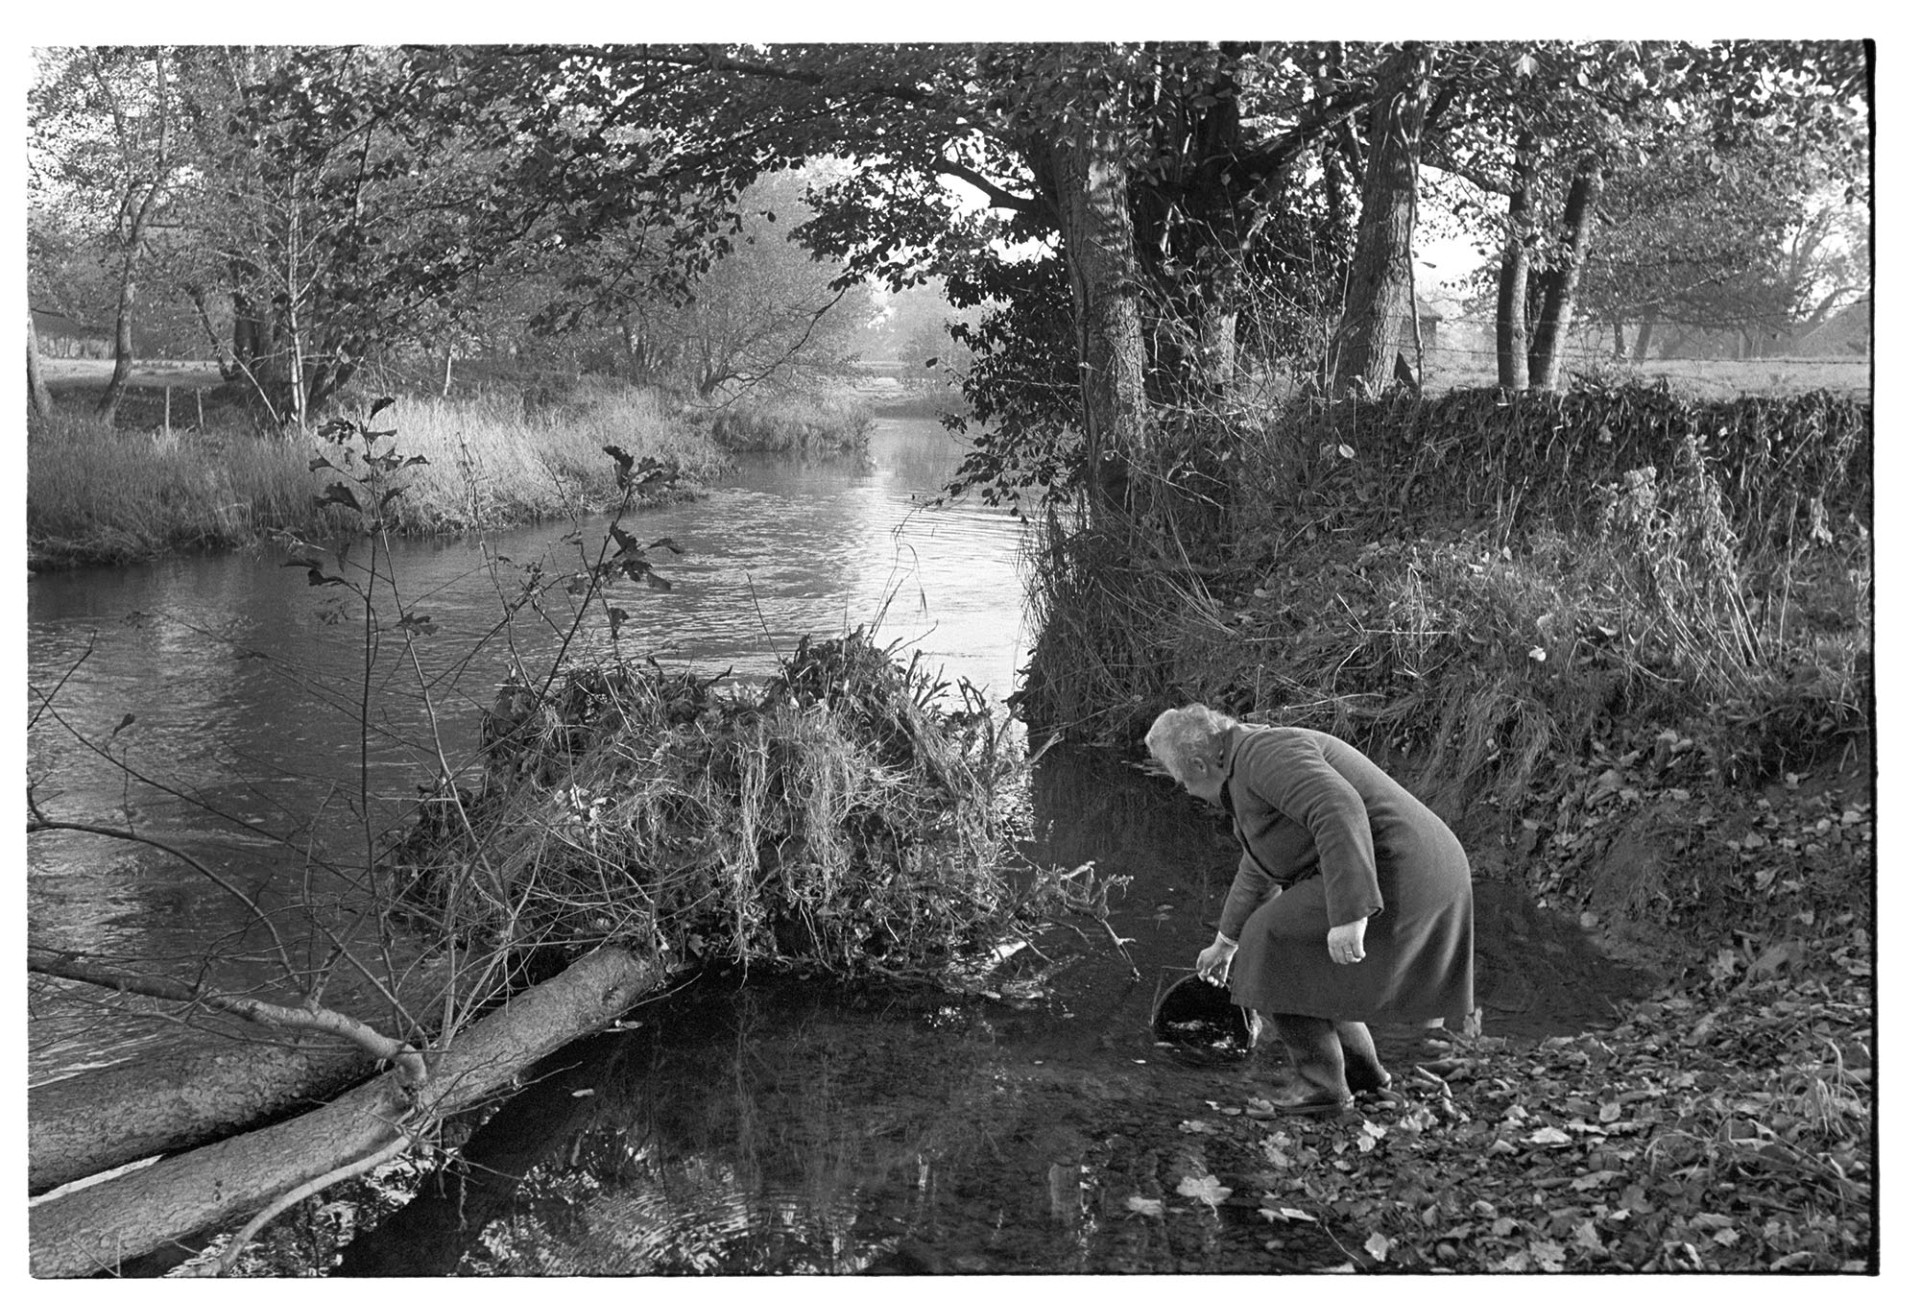 Woman farmer filling bucket with water from river. 
[A woman filling a bucket with water from the River Mole at Cawseys Meethe, Kings Nympton. The river is lined with trees and fields.]